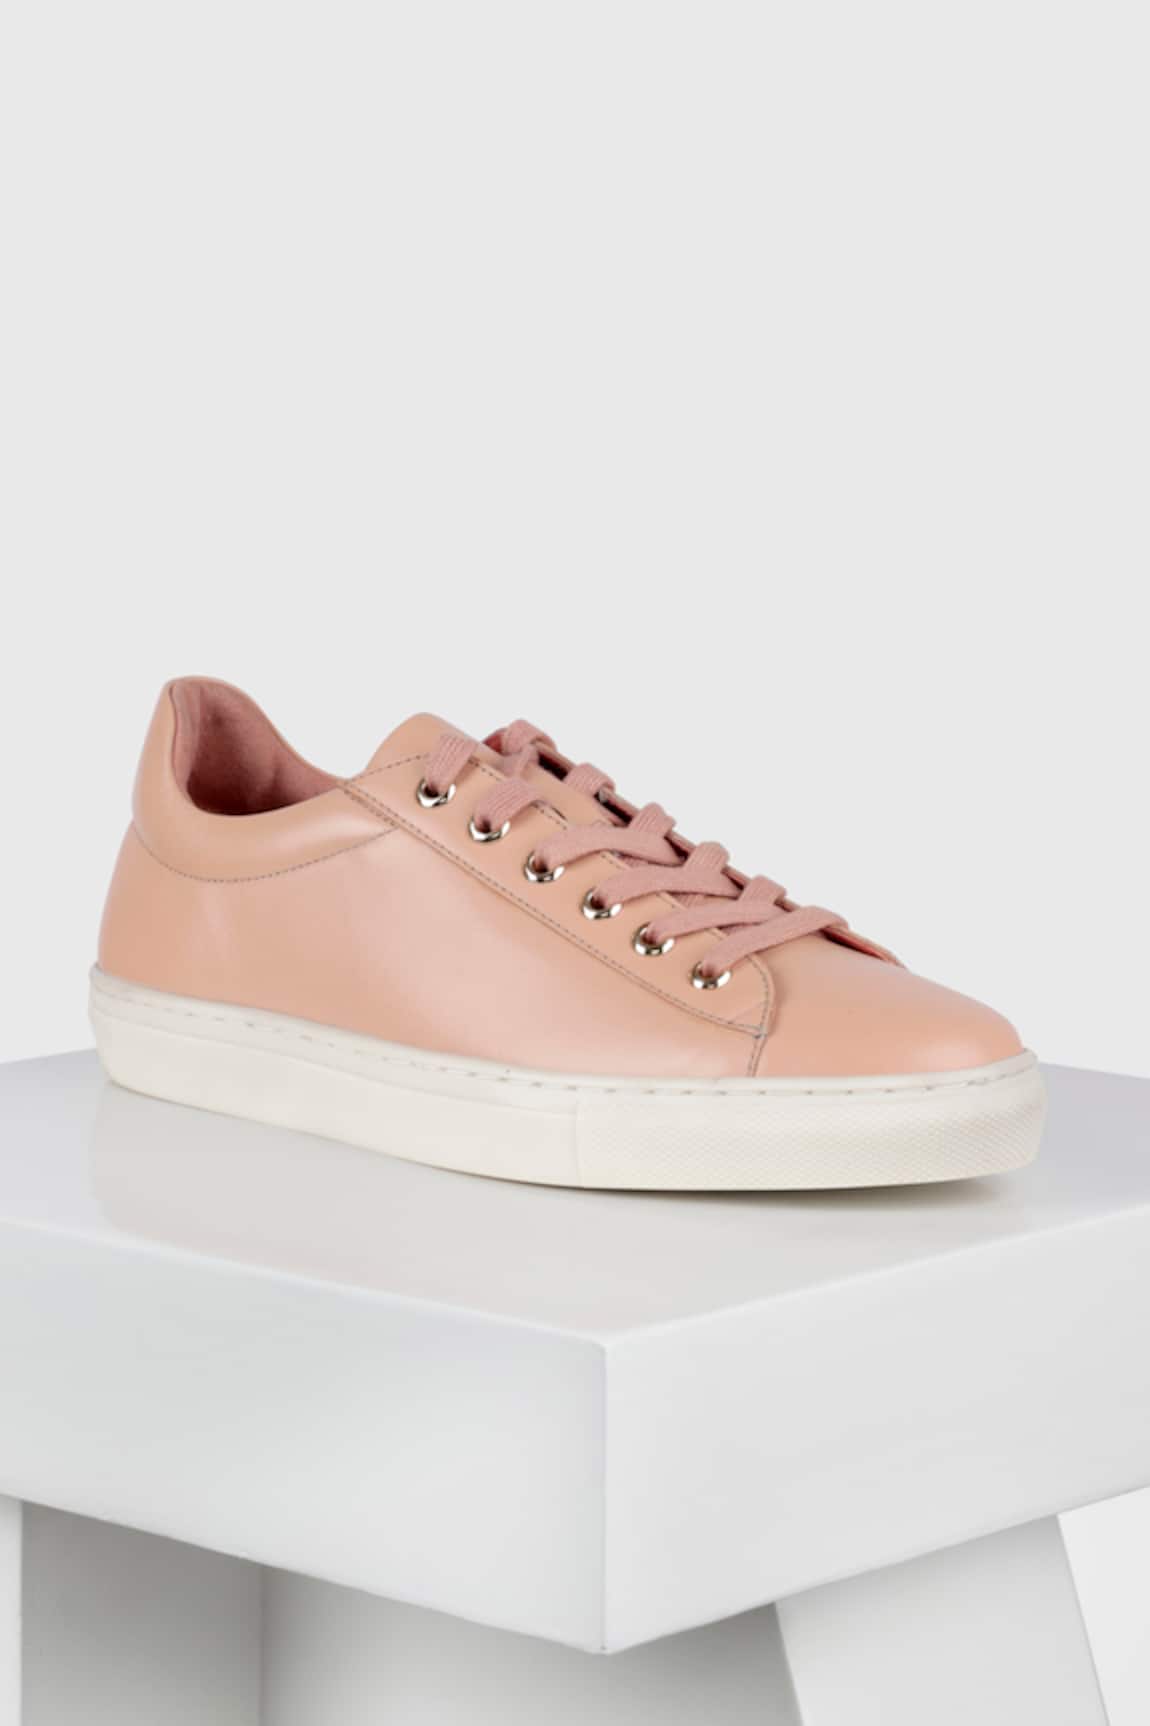 OROH Bailen Solid Leather Sneakers